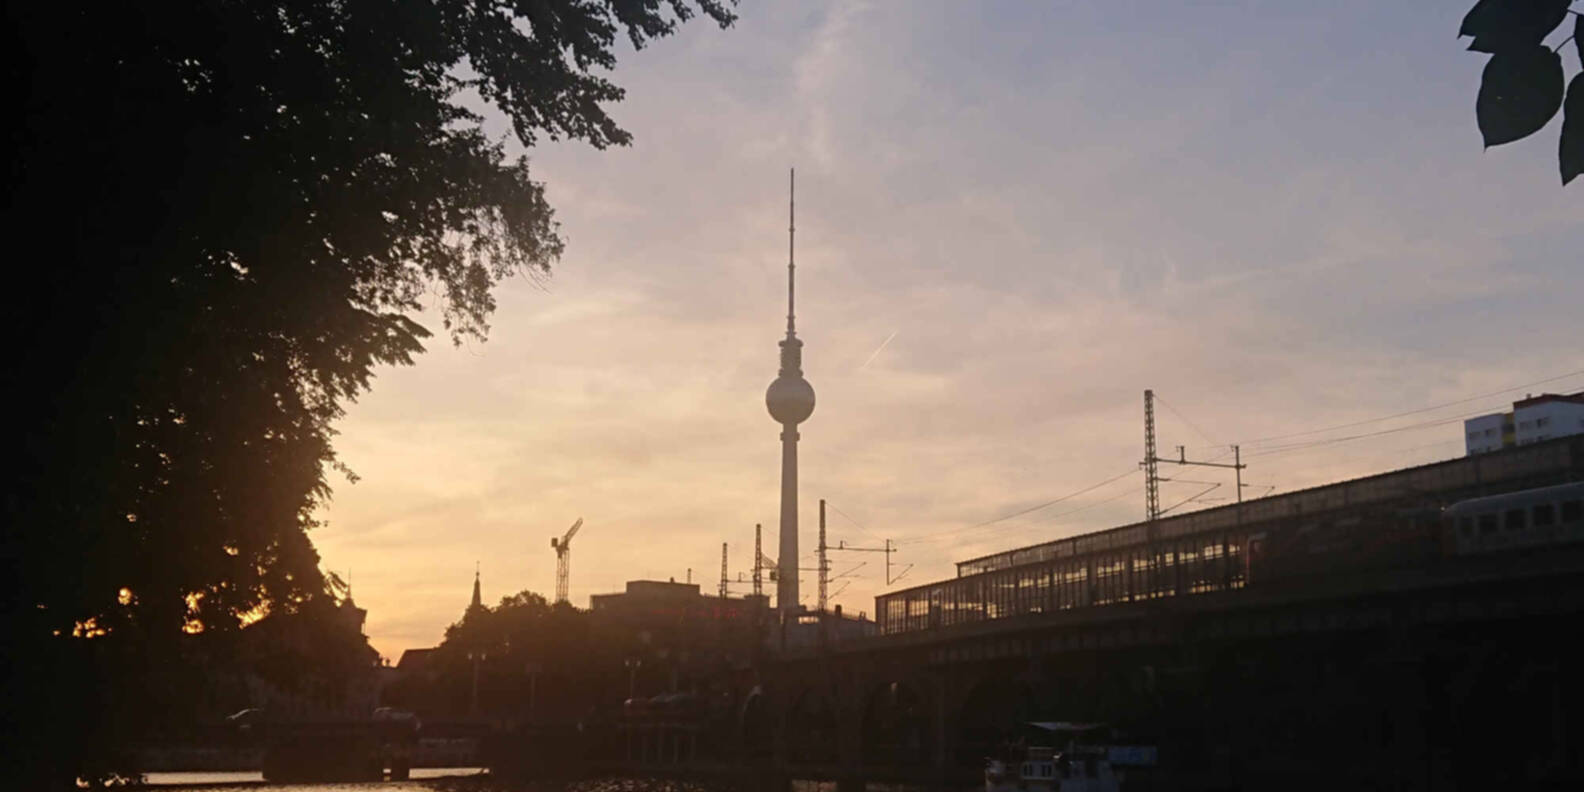 A photo of the Berliner Funkturm at sunset